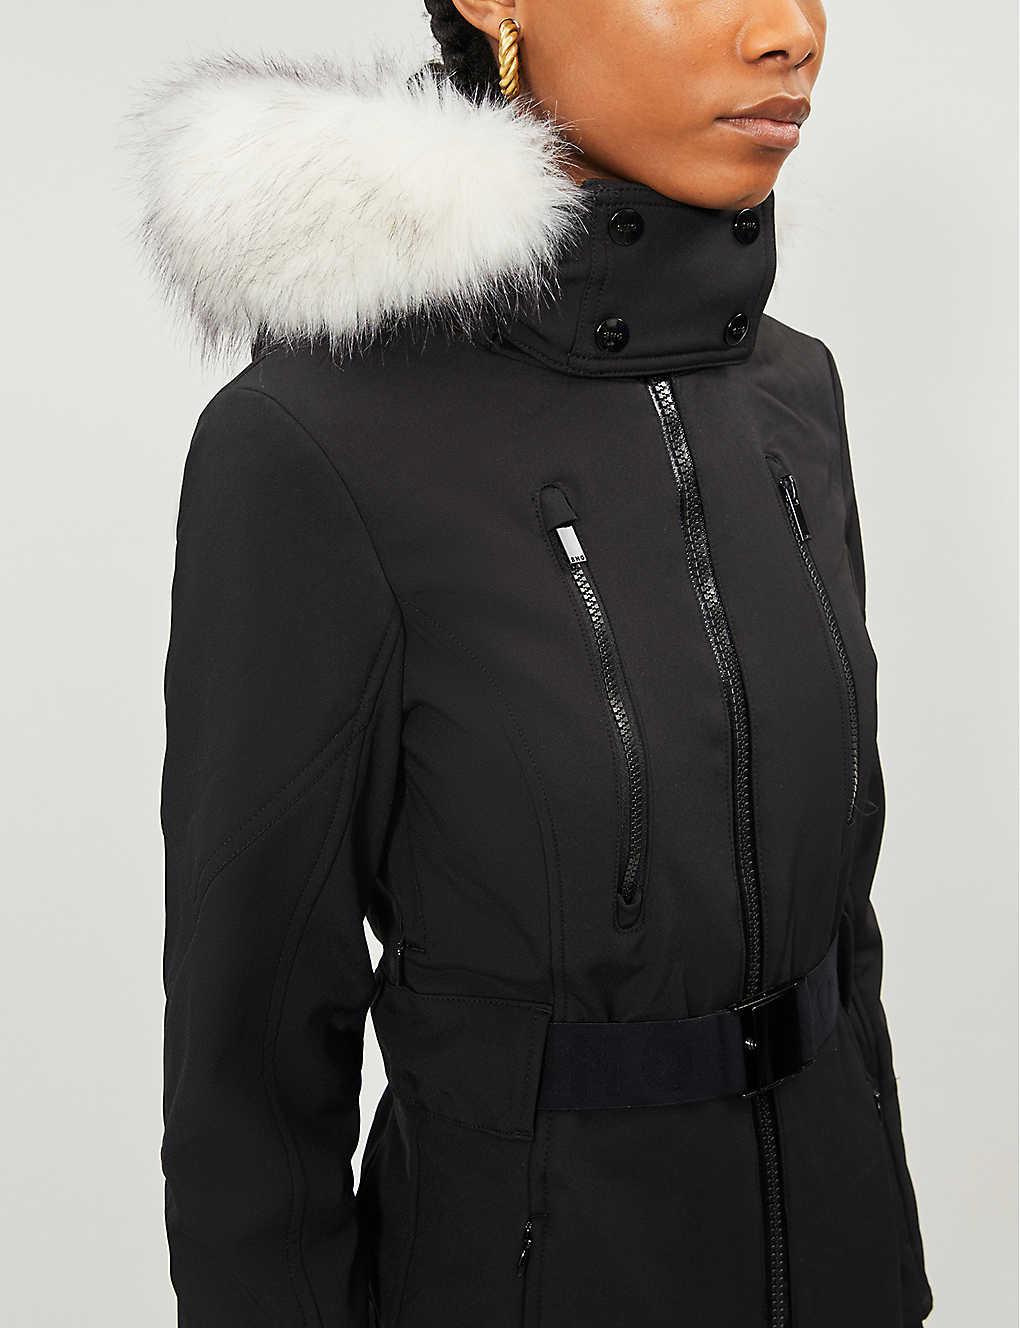 TOPSHOP Synthetic black Hooded Ski Snow Suit By Sno | Lyst